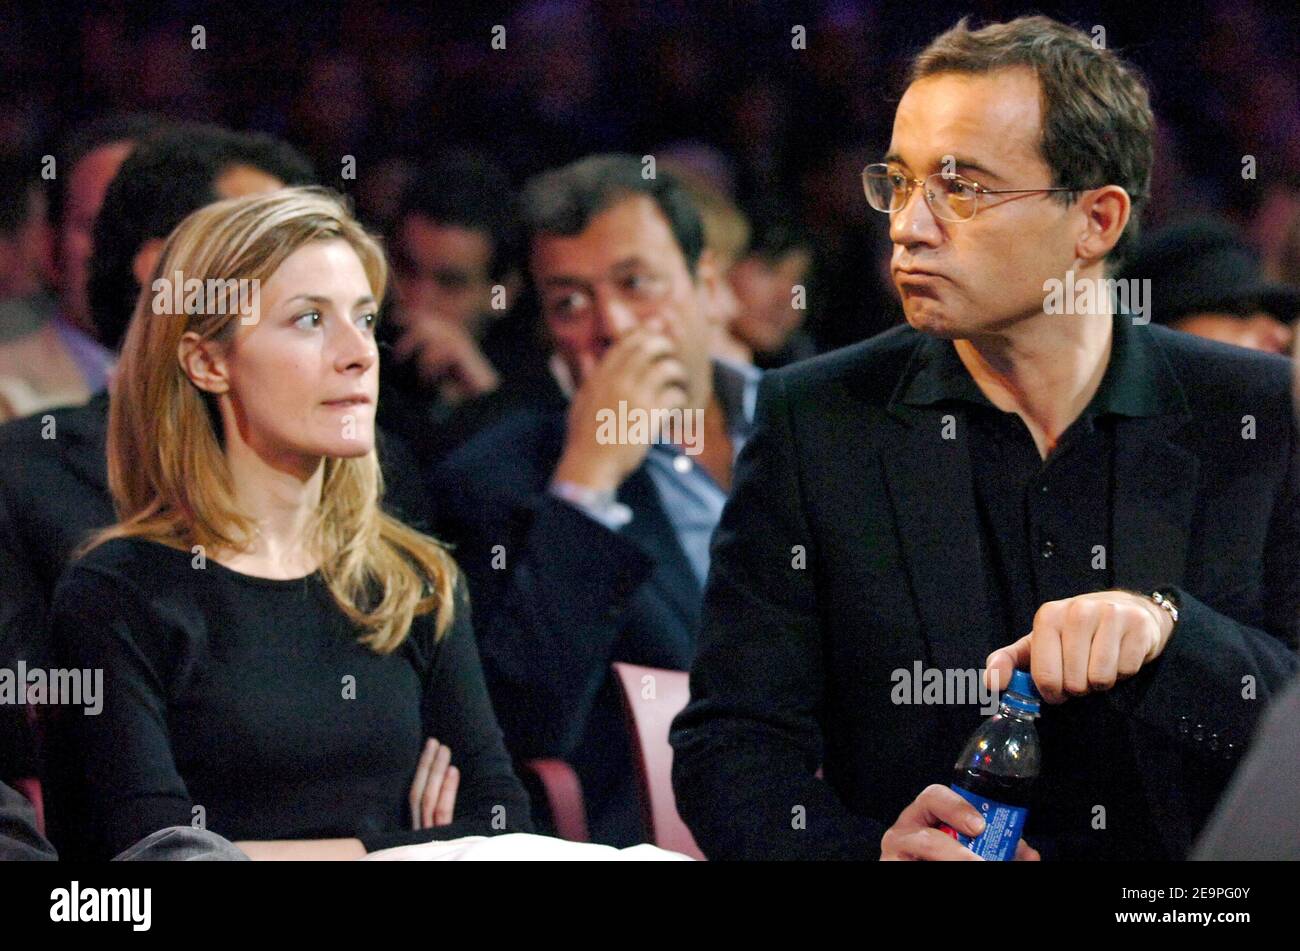 French TV anchor Jean-Luc Delarue and his girlfriend Elisabeth Bost attend  the WBA international light flyweigh at the Palais Omnisports Paris-Bercy  in Paris, France on December 2, 2006. Photo by Nicolas  Gouhier/Cameleon/ABACAPRESS.COM